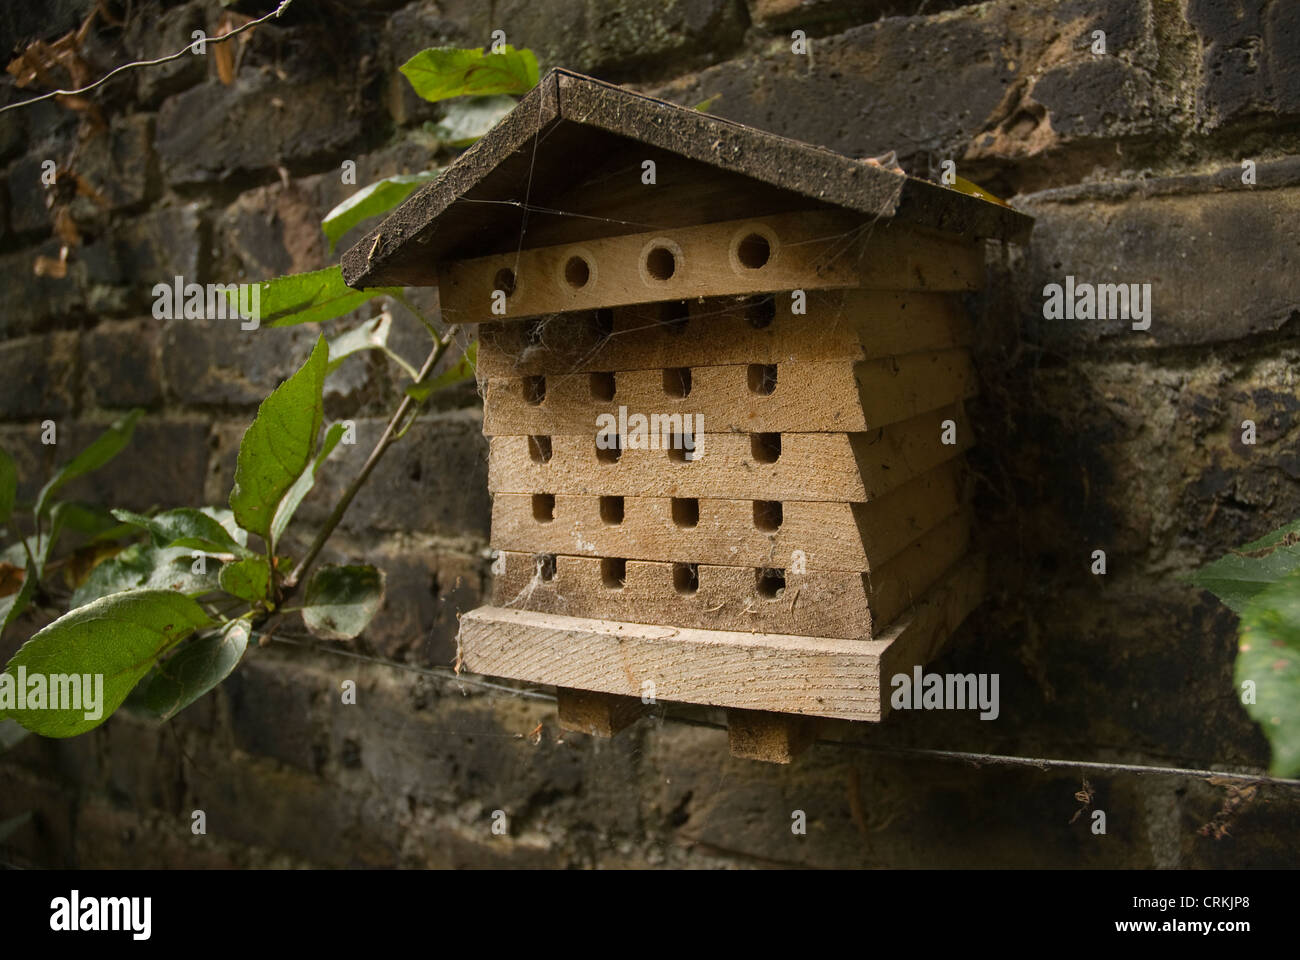 Insect house Stock Photo